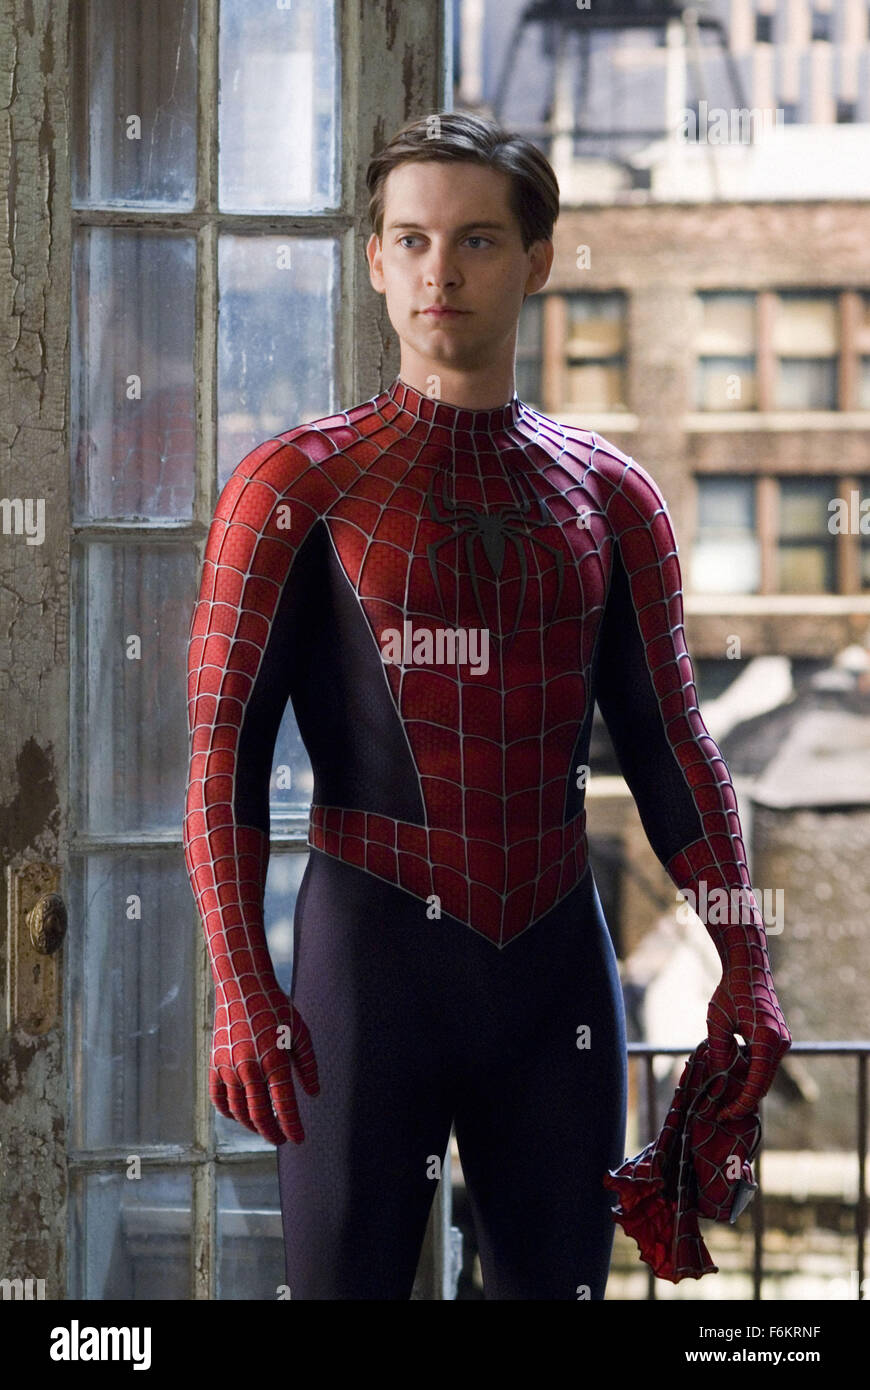 Apr 30, 2007 - New York, NY, USA - RELEASE DATE: May 4, 2007. DIRECTOR: Sam Raimi. STUDIO: Columbia Pictures. PLOT: A strange black entity from another world bonds with Peter Parker and causes inner turmoil as he contends with new villains, temptations, and revenge. PICTURED: TOBEY MAGUIRE (Peter Parker/Spider-Man). (Credit Image: c Merrick Morton/Columbia Pictures) RESTRICTIONS: This is a publicly distributed film, television or publicity photograph. Non-editorial use may require additional clearances. Stock Photo